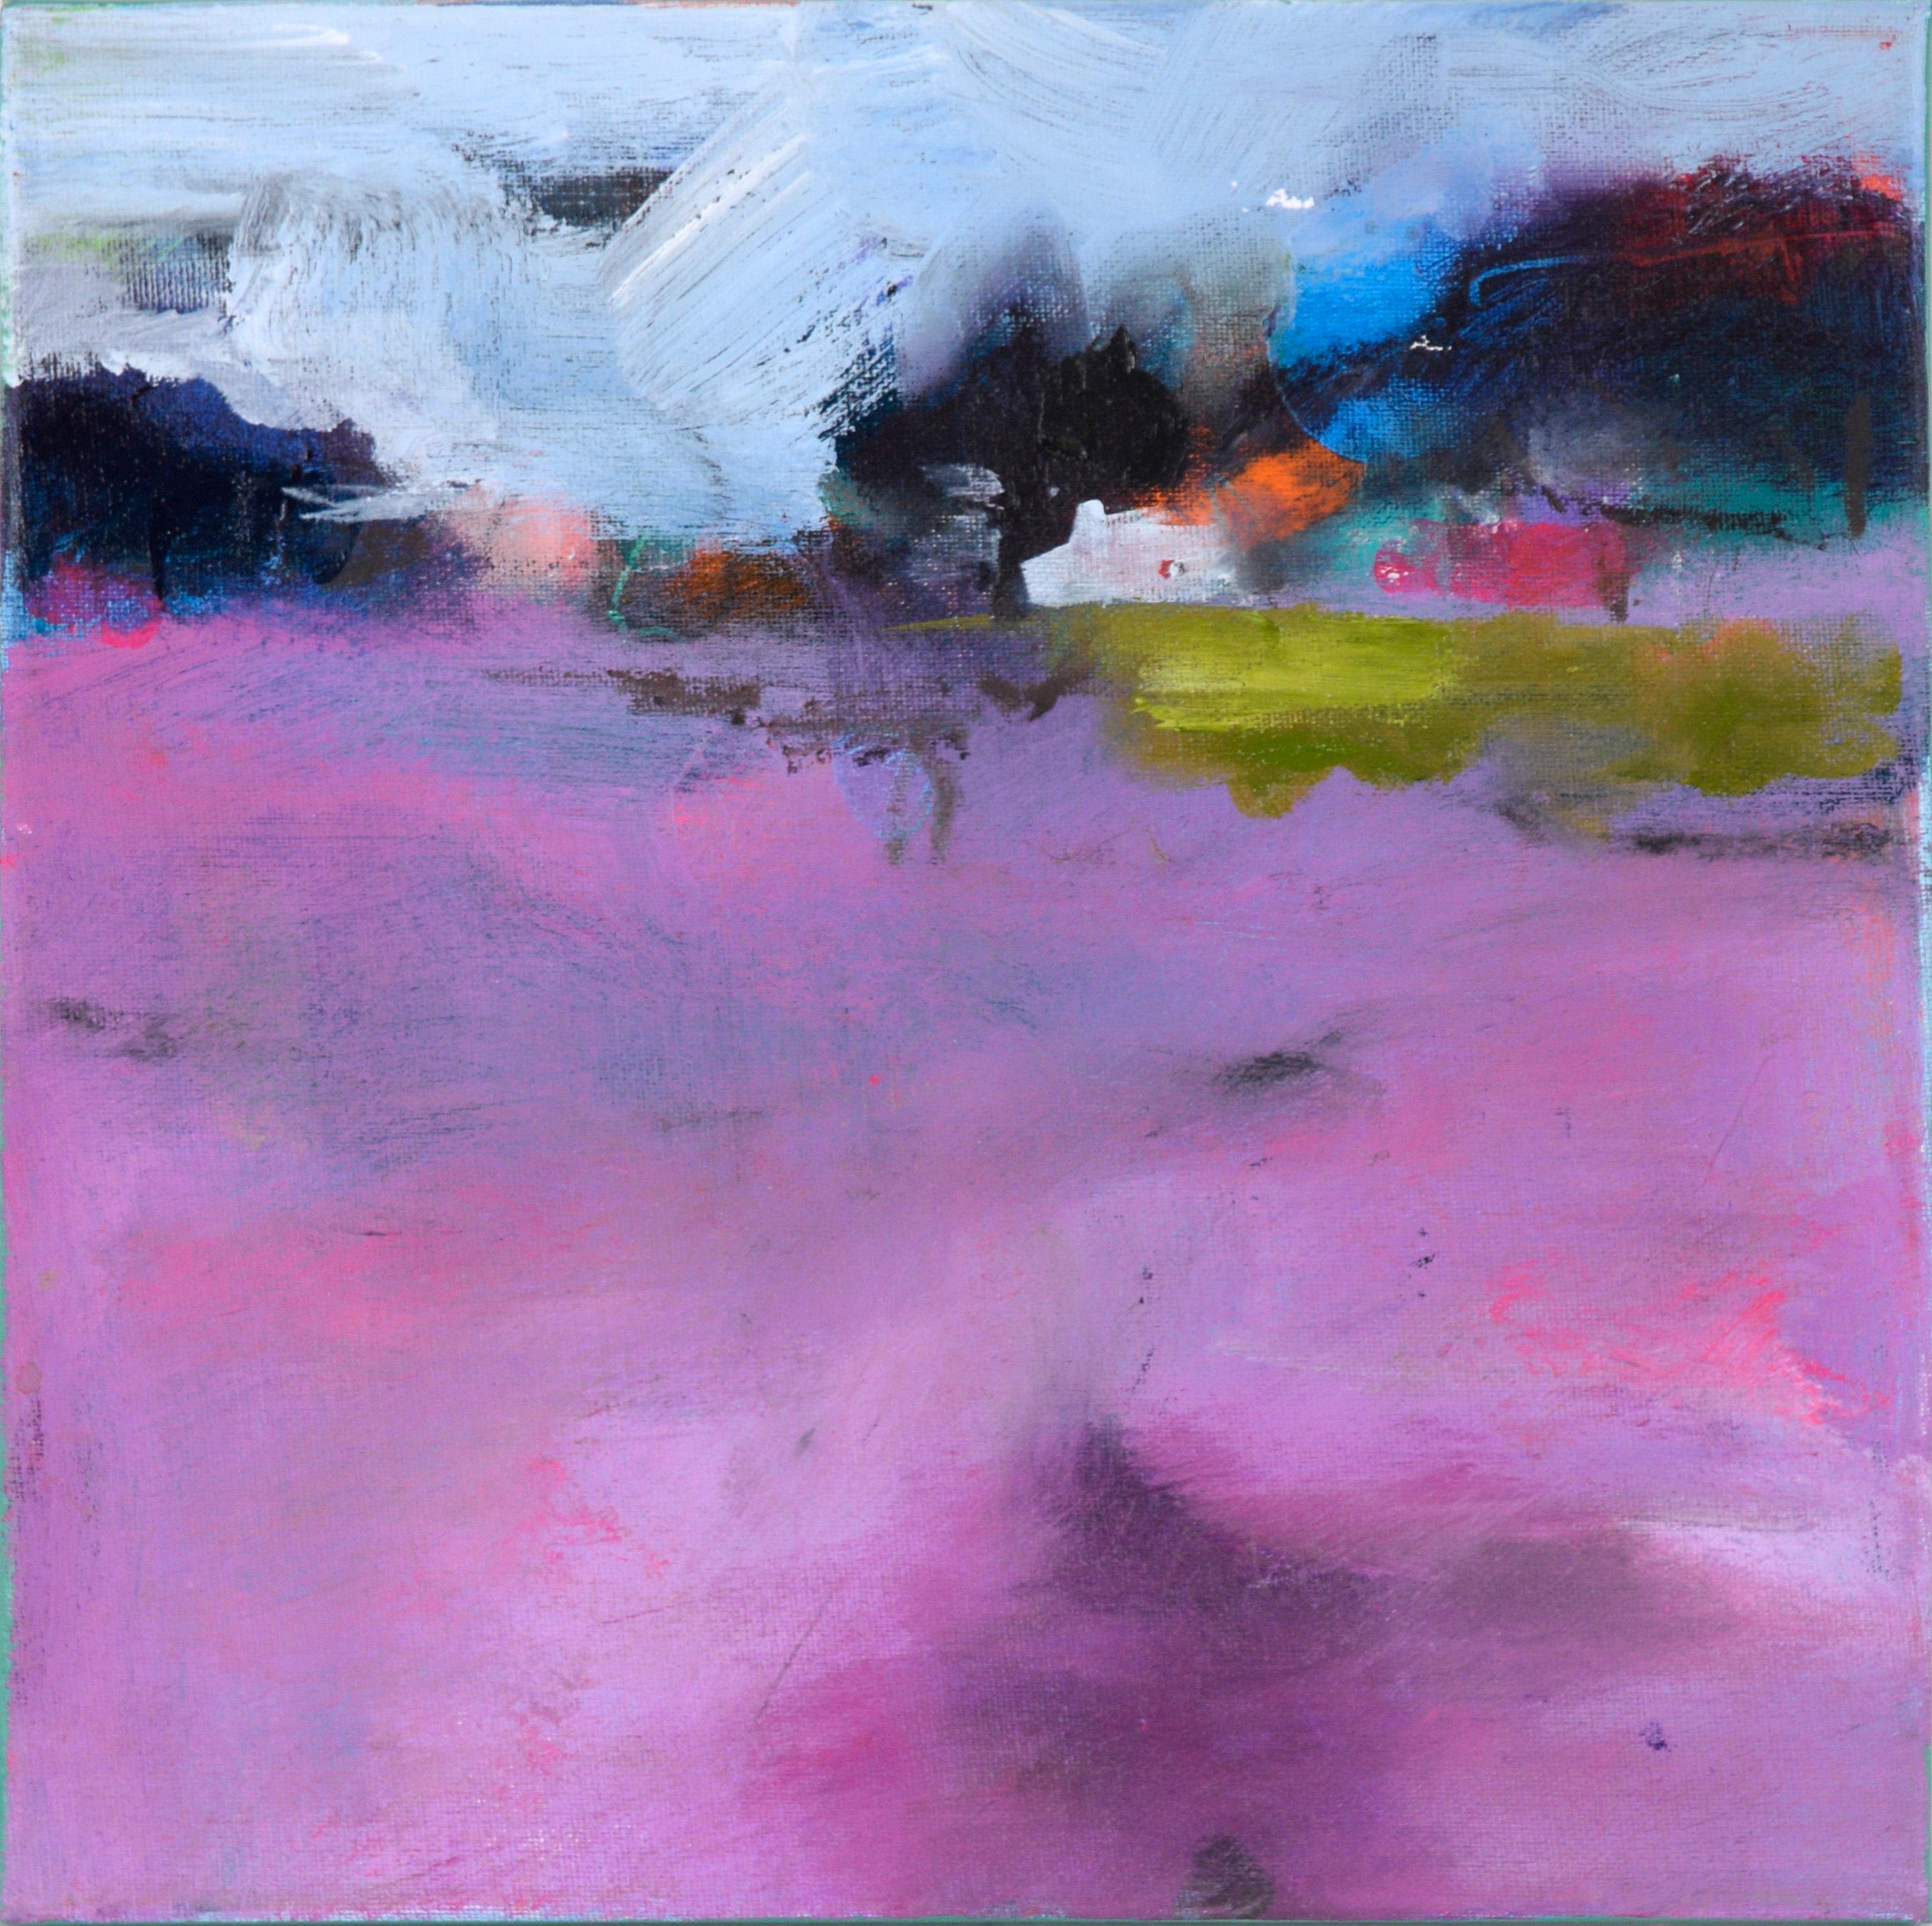 Ilana Ingber Landscape Painting - Lavender Field - Abstracted Landscape in Acrylic on Canvas